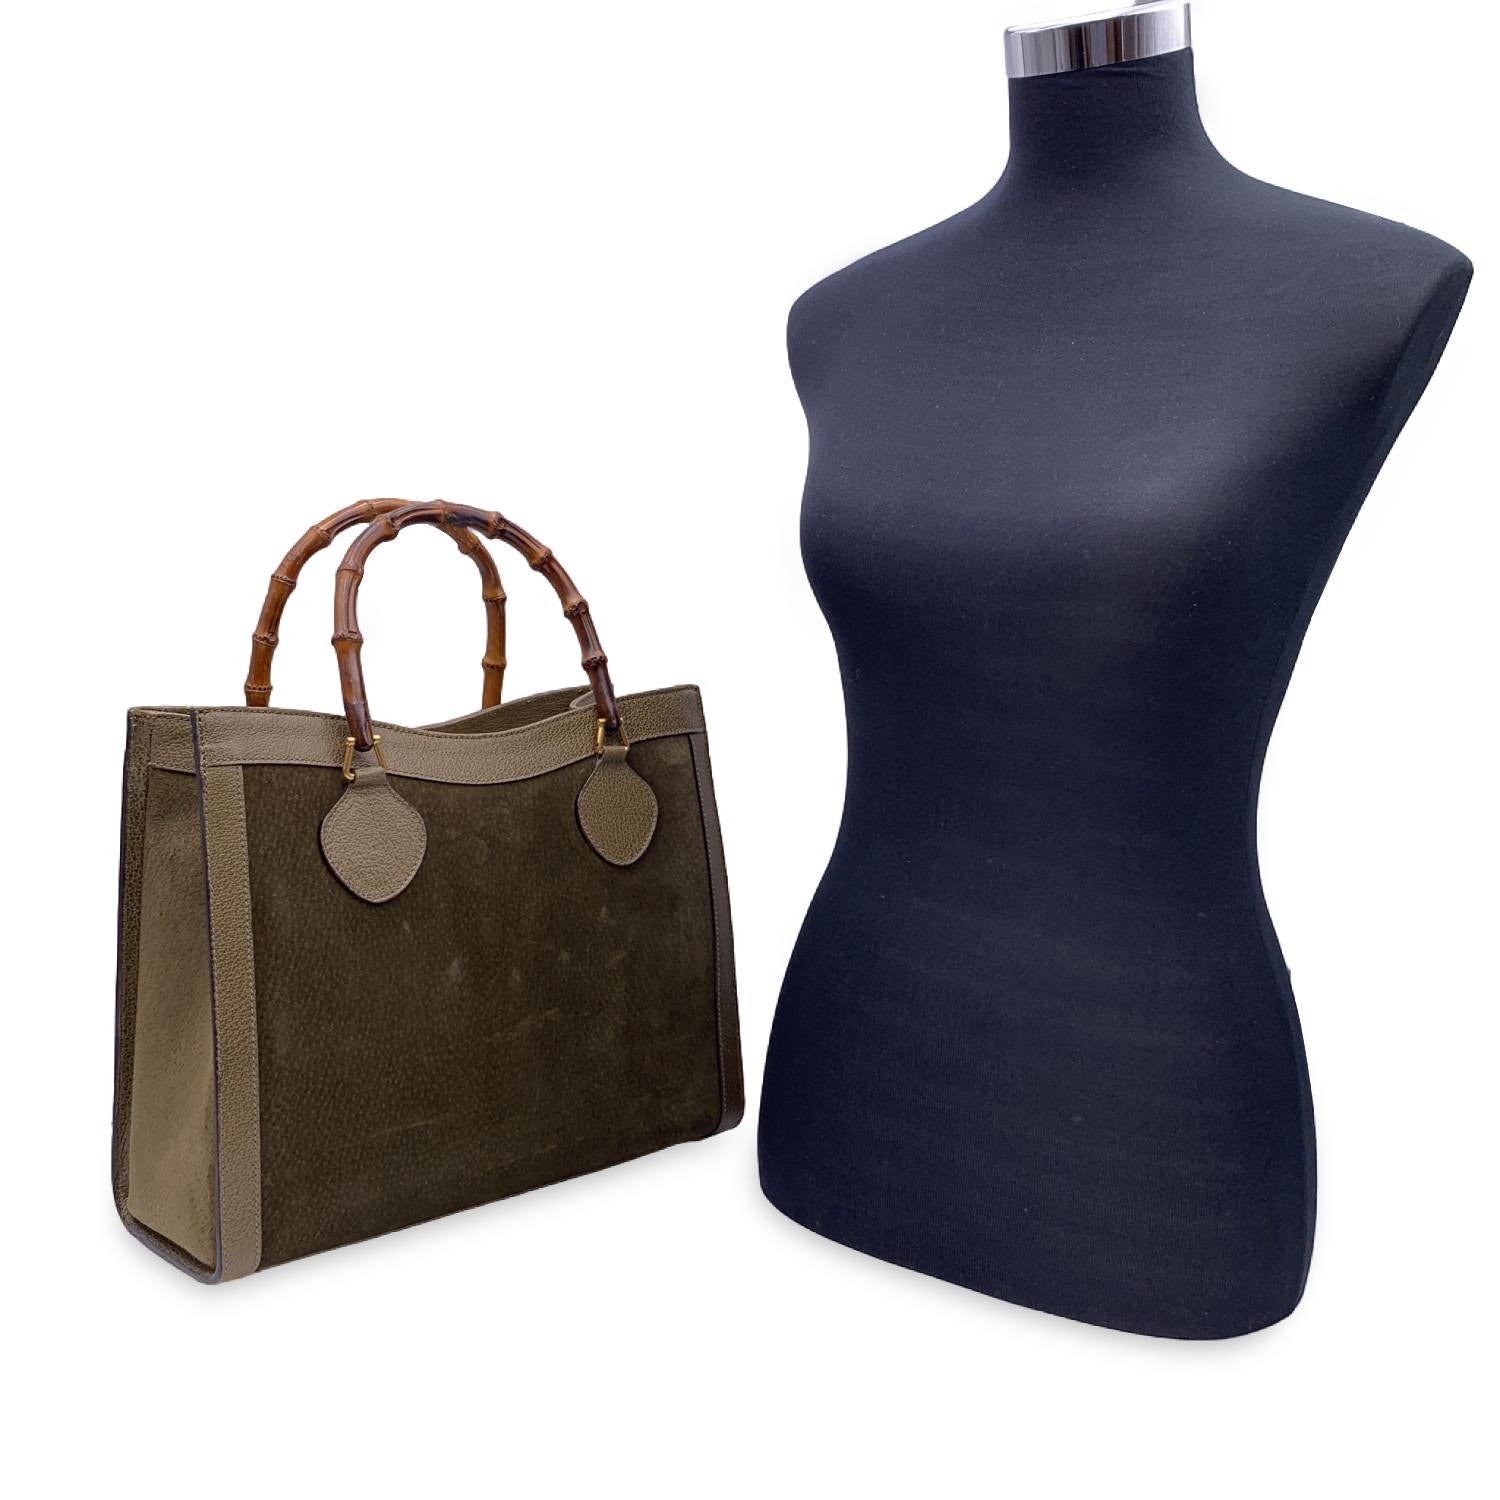 Princess Diana, was snapped carrying a this model on several occasions.

Details

MATERIAL: Suede

COLOR: Green

MODEL: Diana Bamboo

GENDER: Women

COUNTRY OF MANUFACTURE: Italy

SIZE: Medium

FABRIC TYPE: Leather

MATERIAL PROCESSING: -

MATERIAL